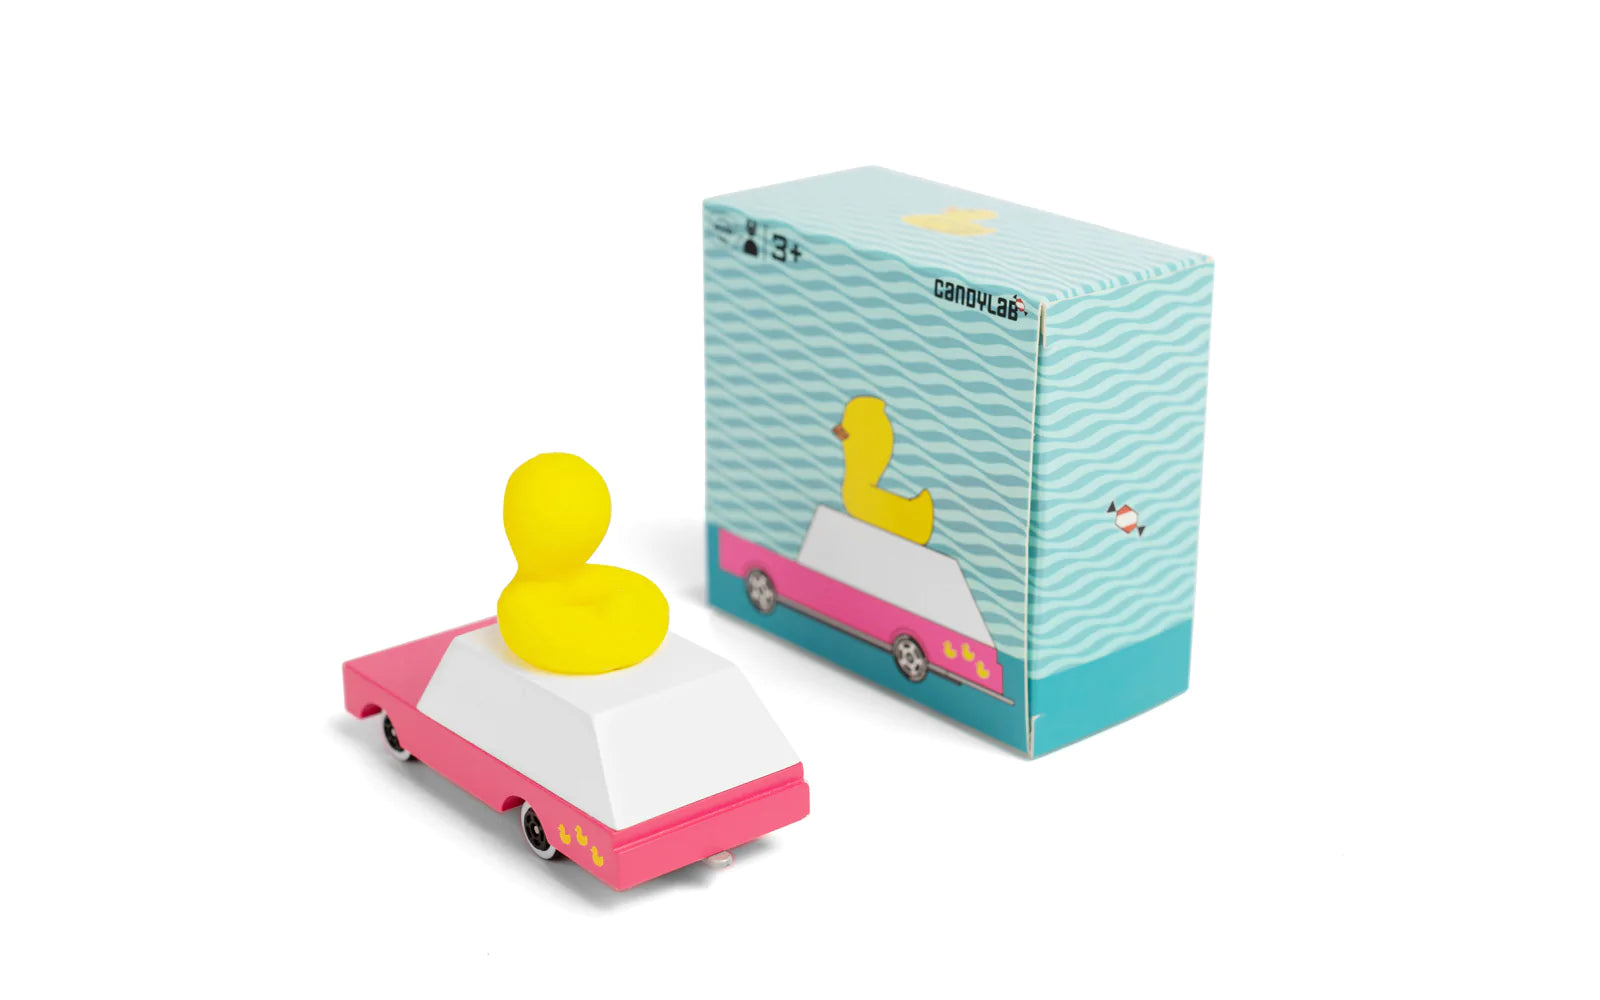 Chariot Duckie Candycar 